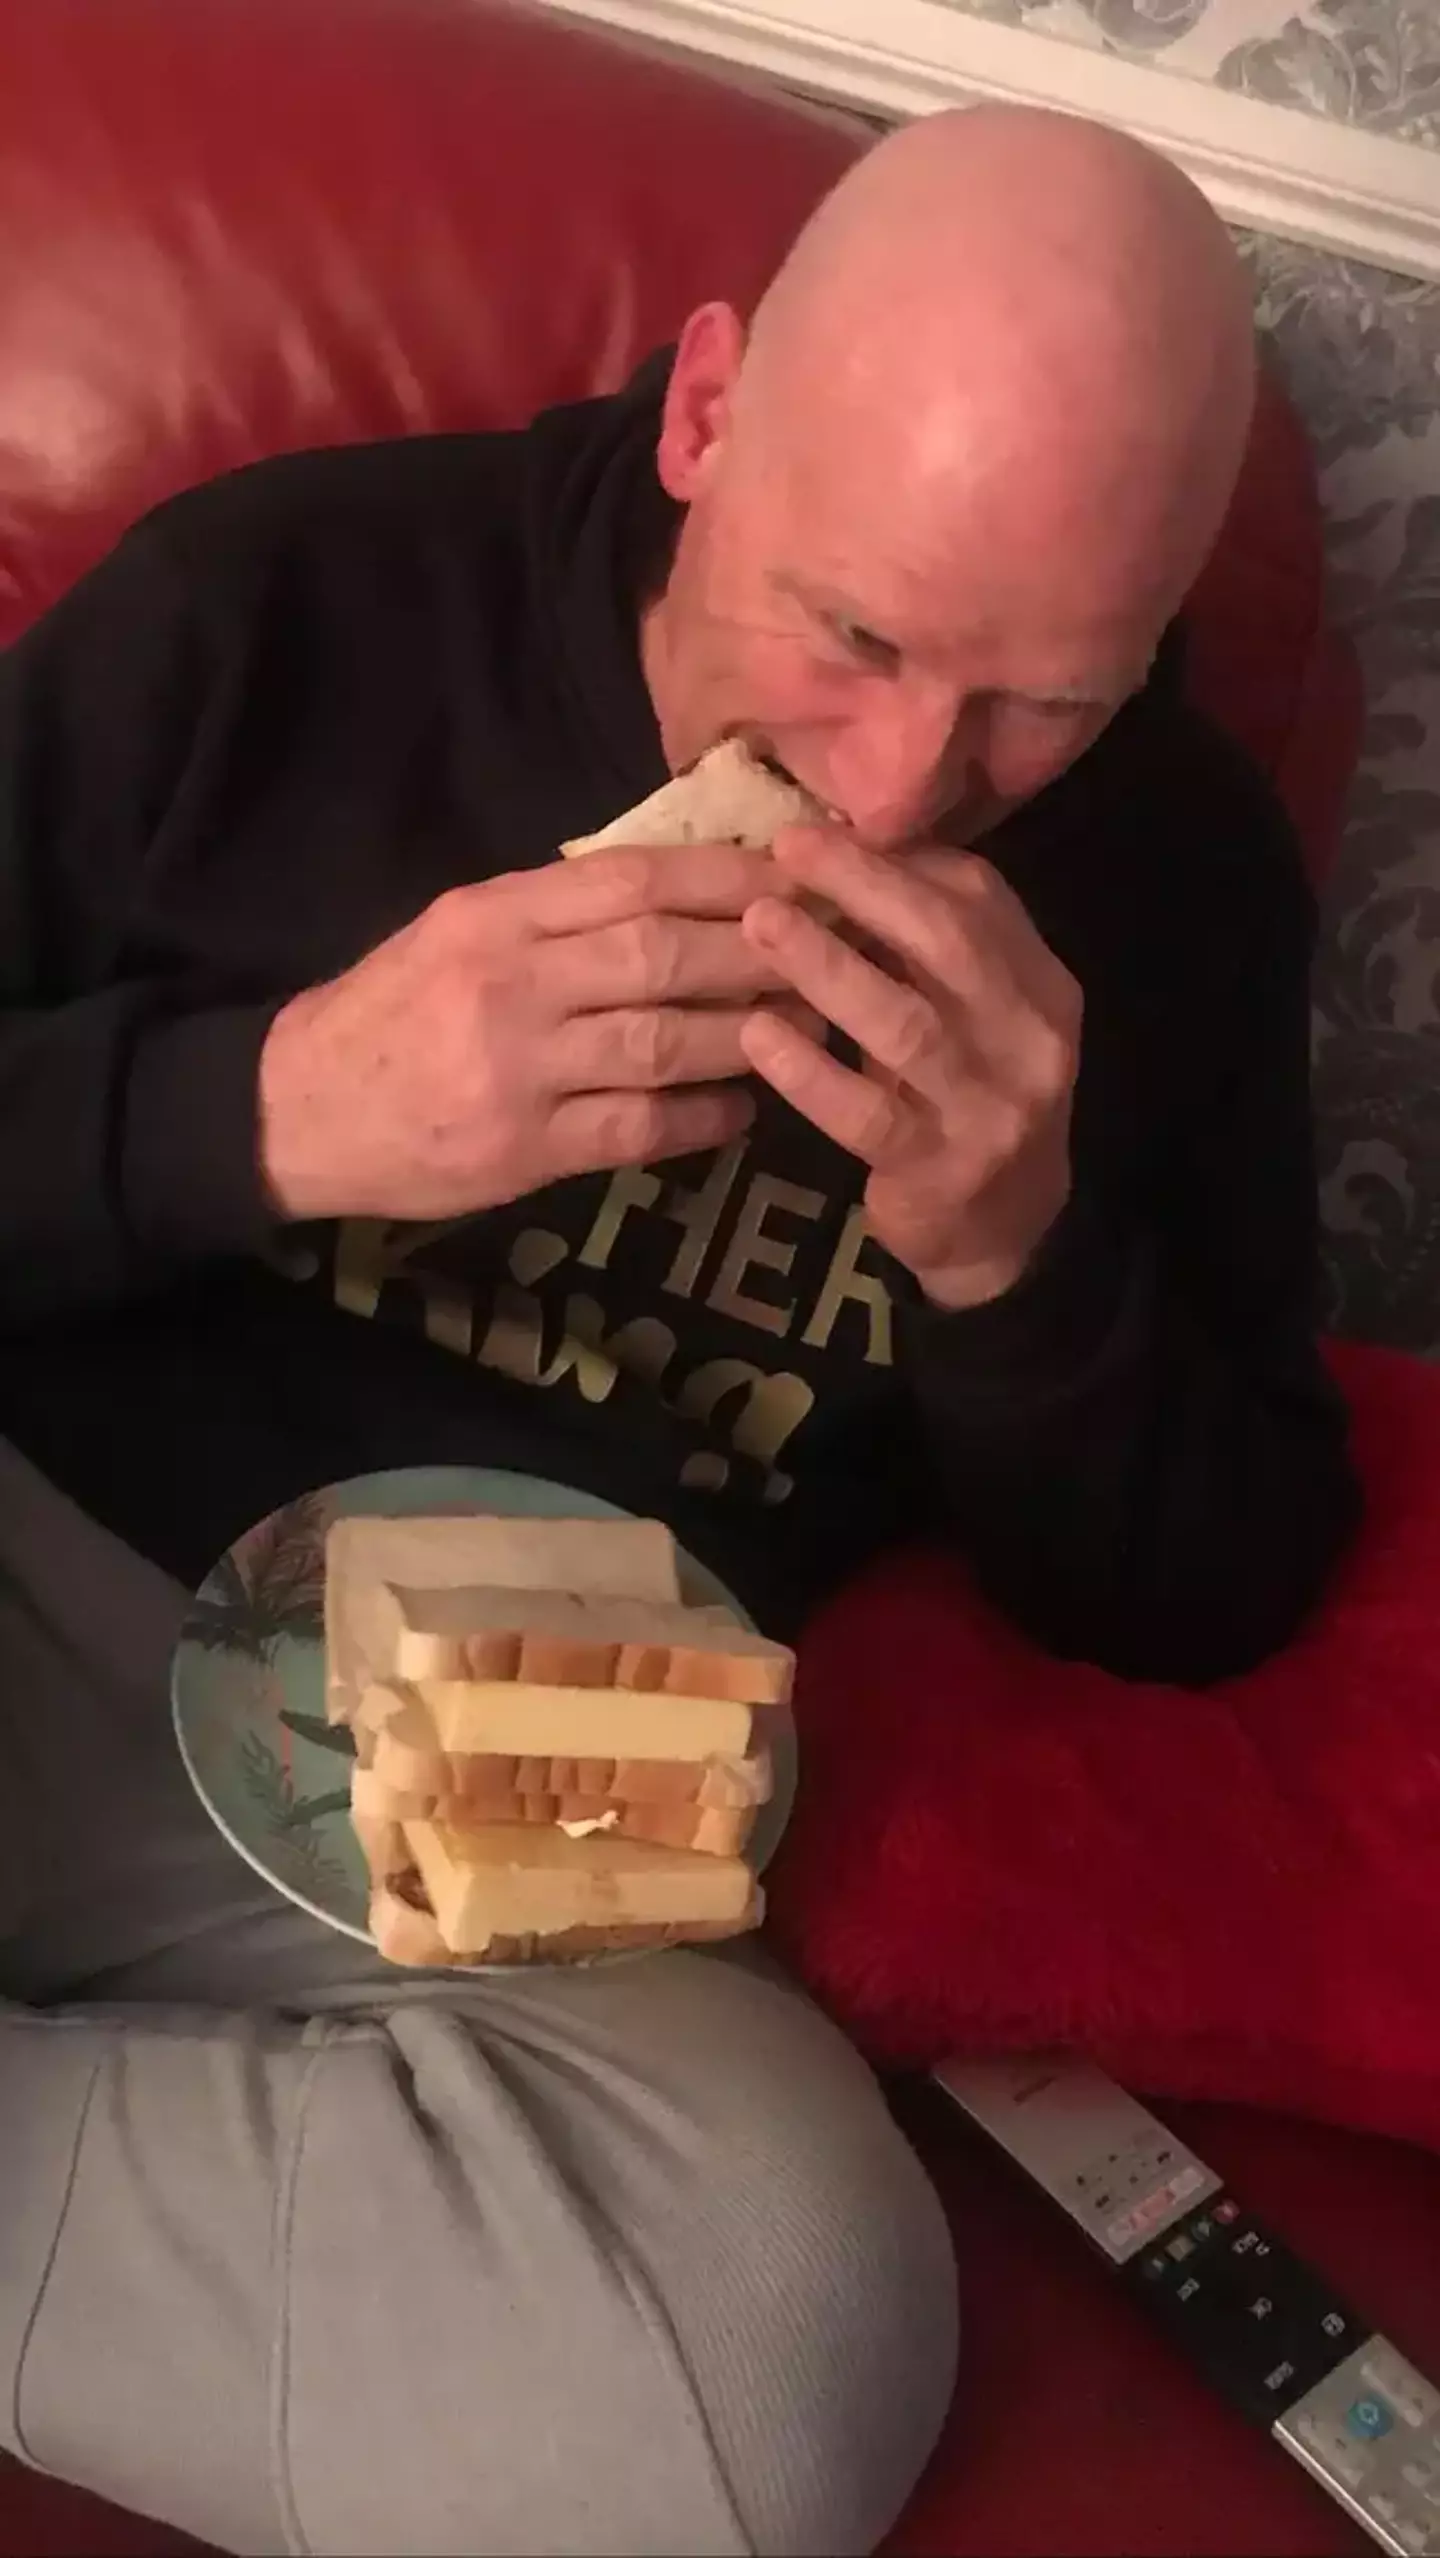 Mark is just crackers about cheese, and he loves eating an entire block of cheese as a filling for a sandwich twice a day.